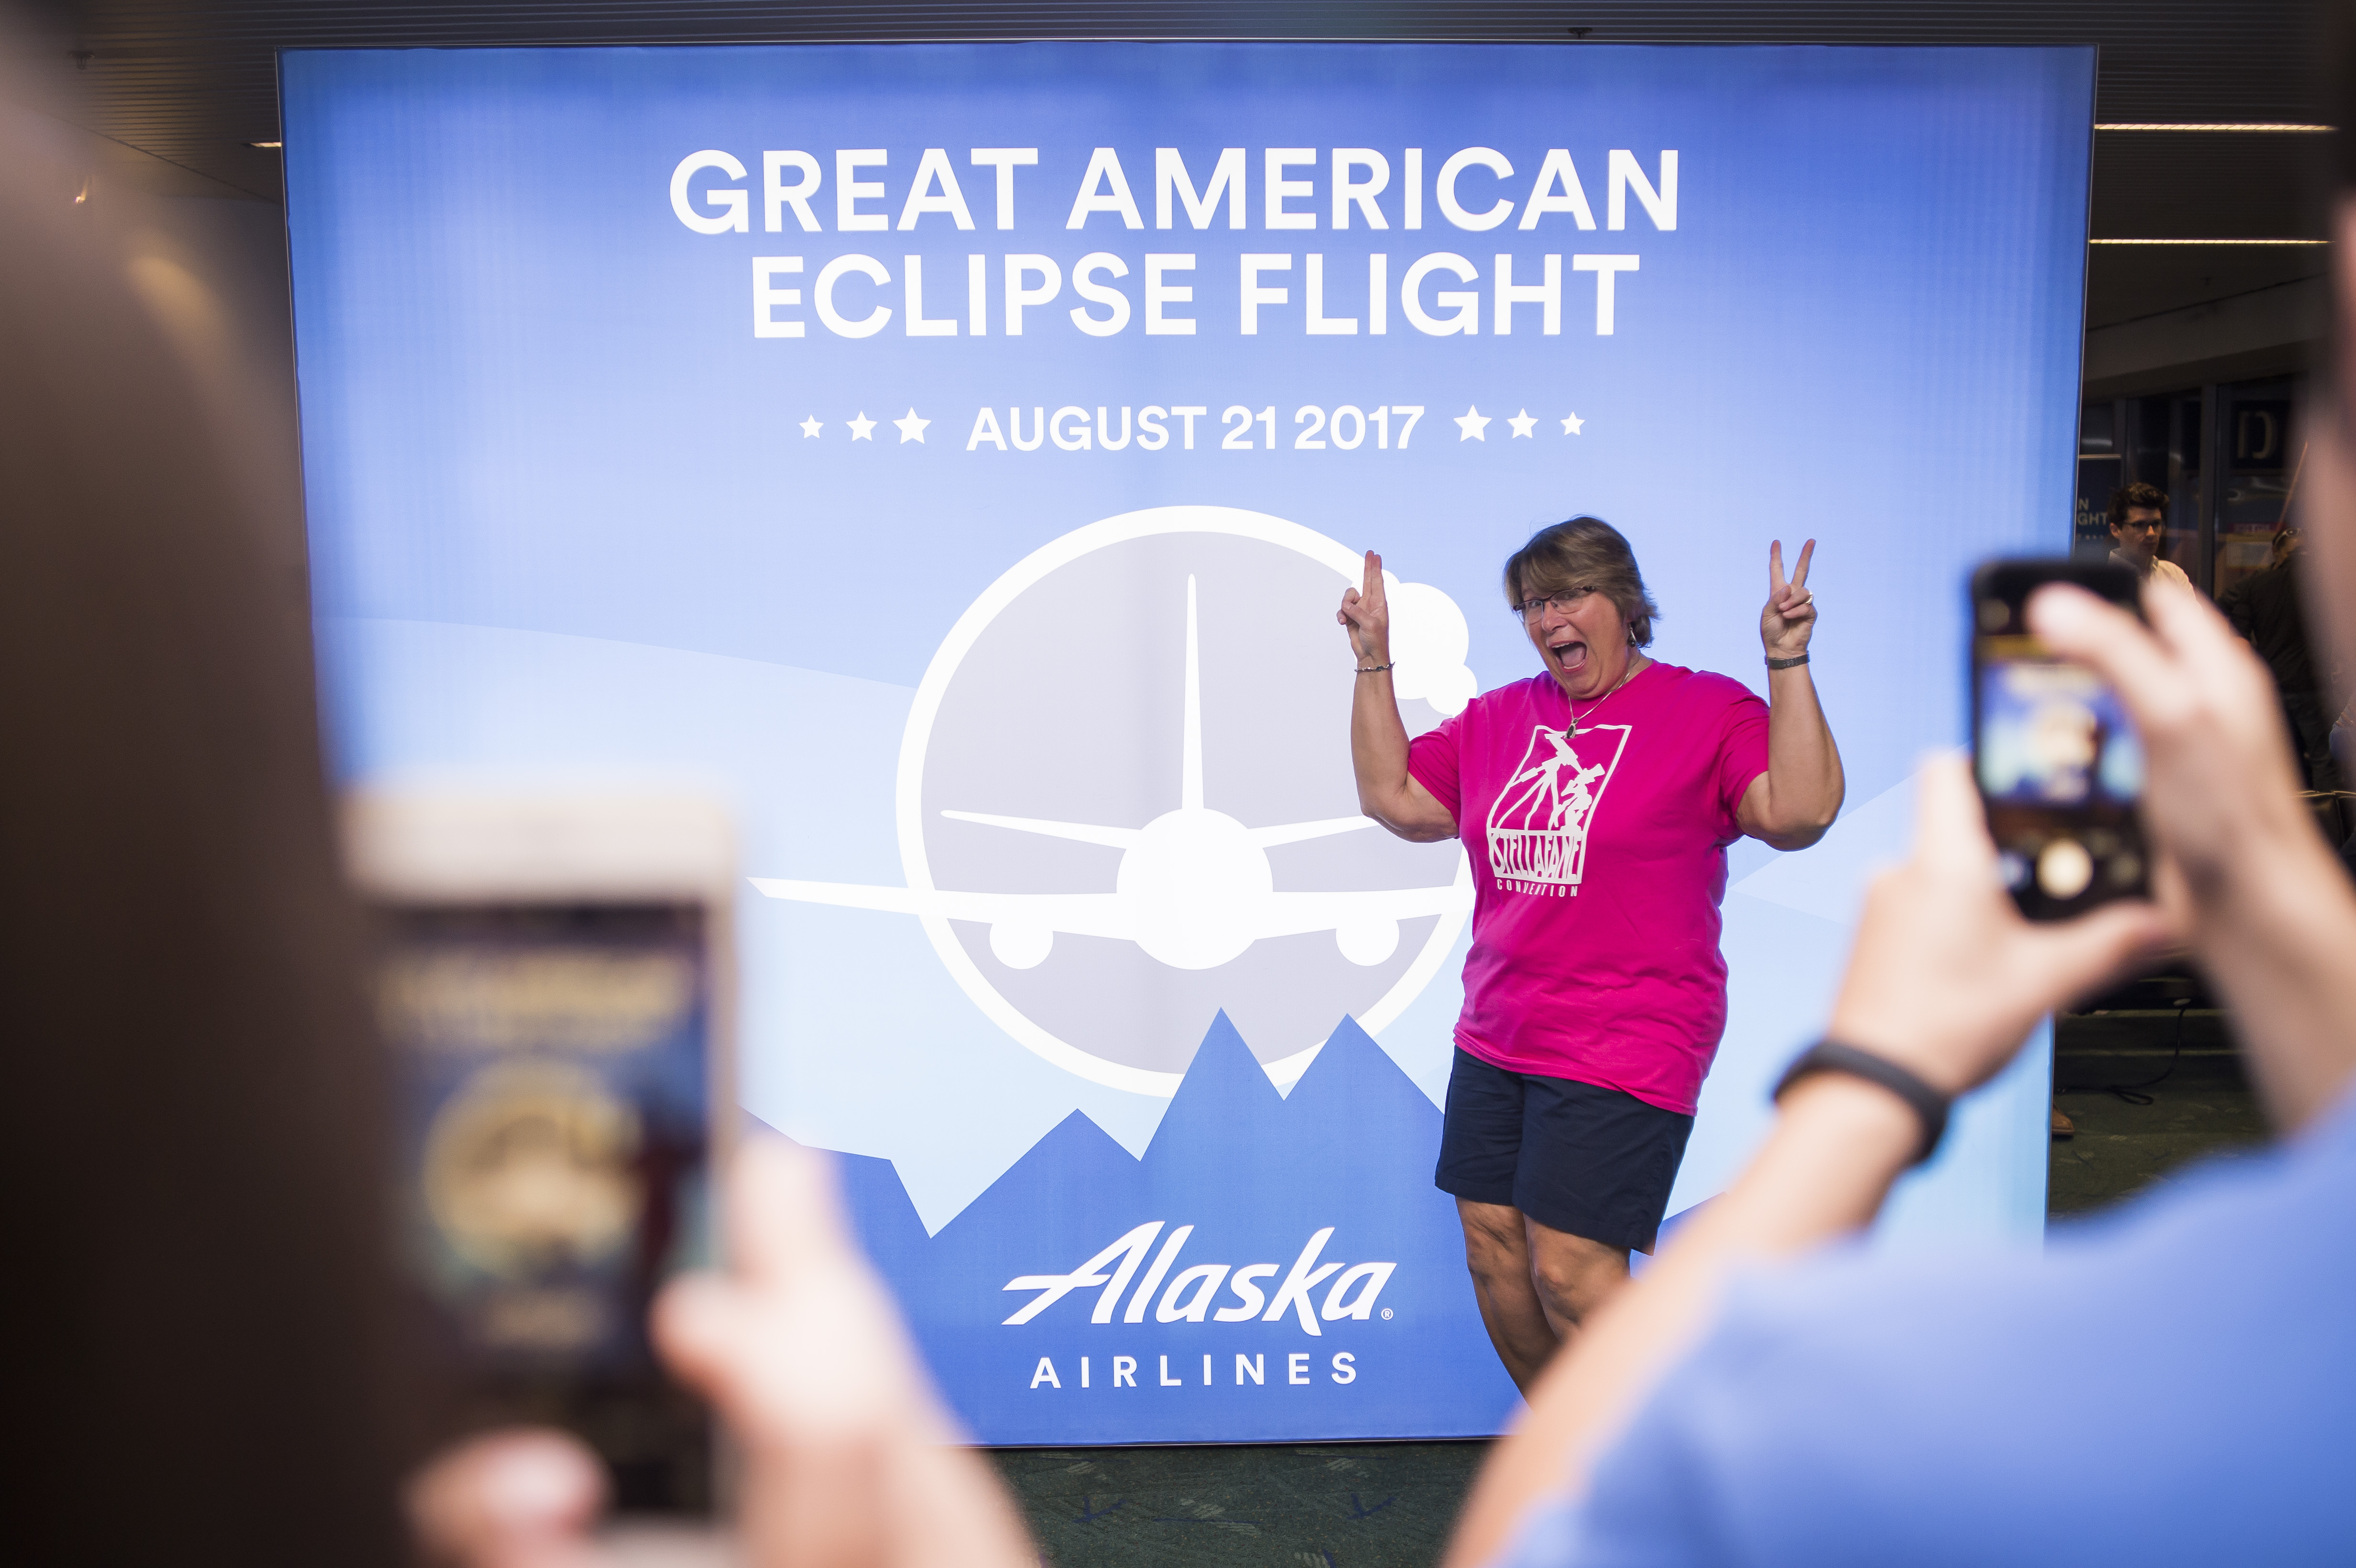 Kimberly Cassia stands in front of the Great American Eclipse Flight poster at the gate while onlookers snap photos.